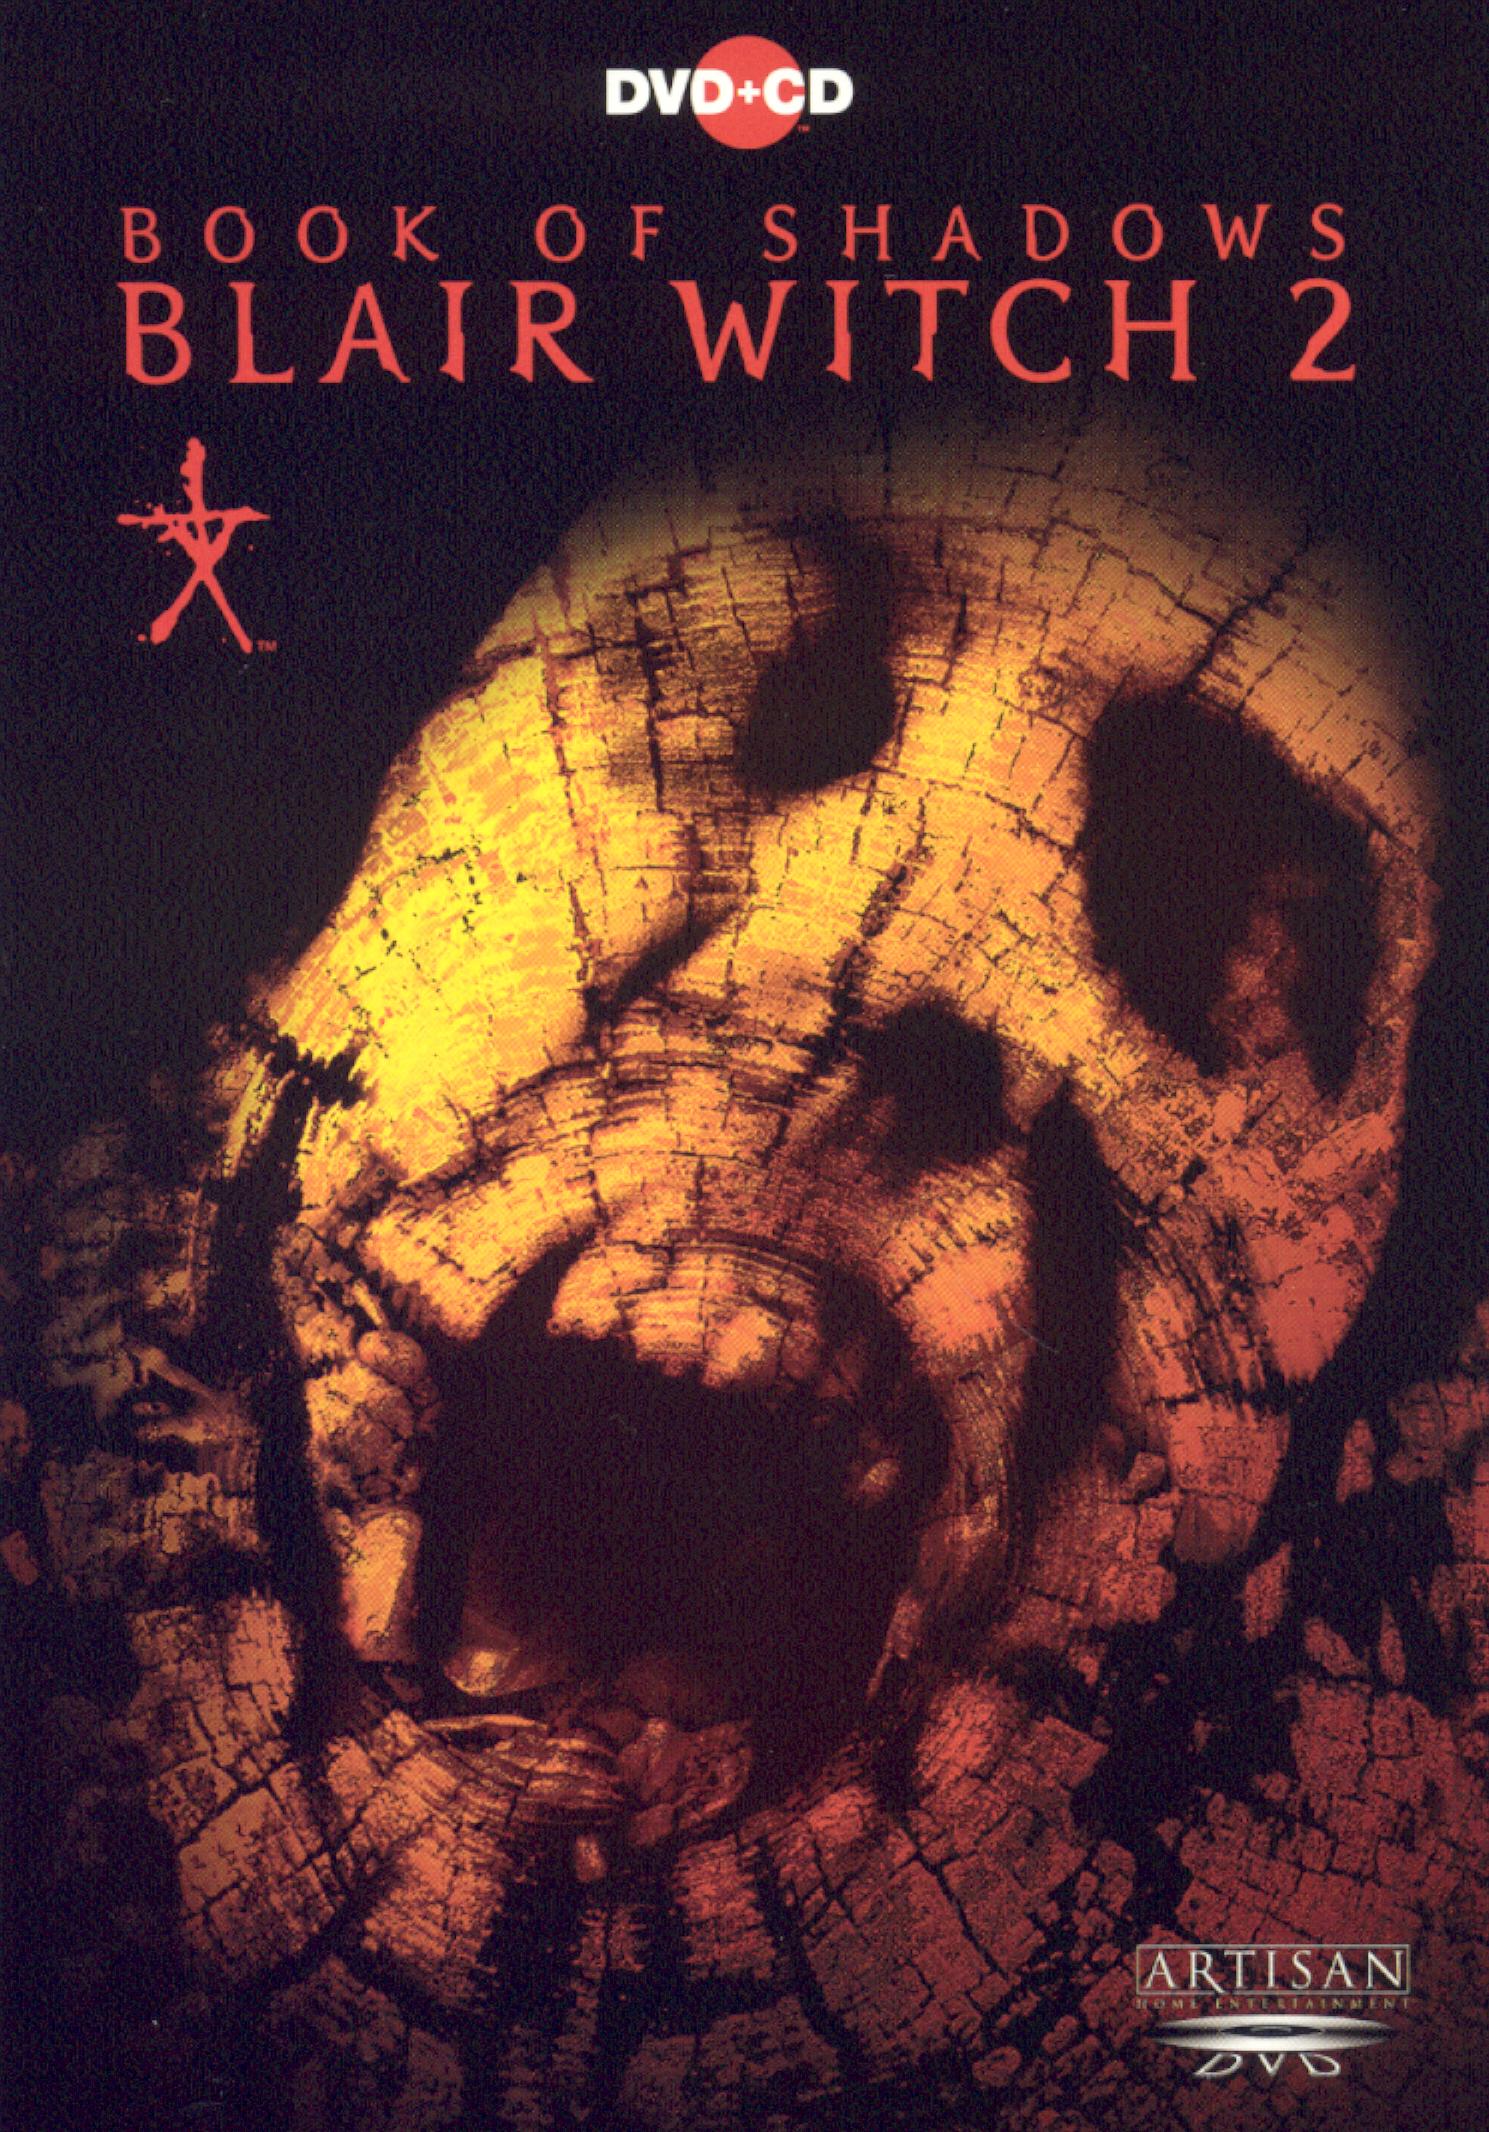 Book of Shadows: Blair Witch 2 [DVD/CD] cover art